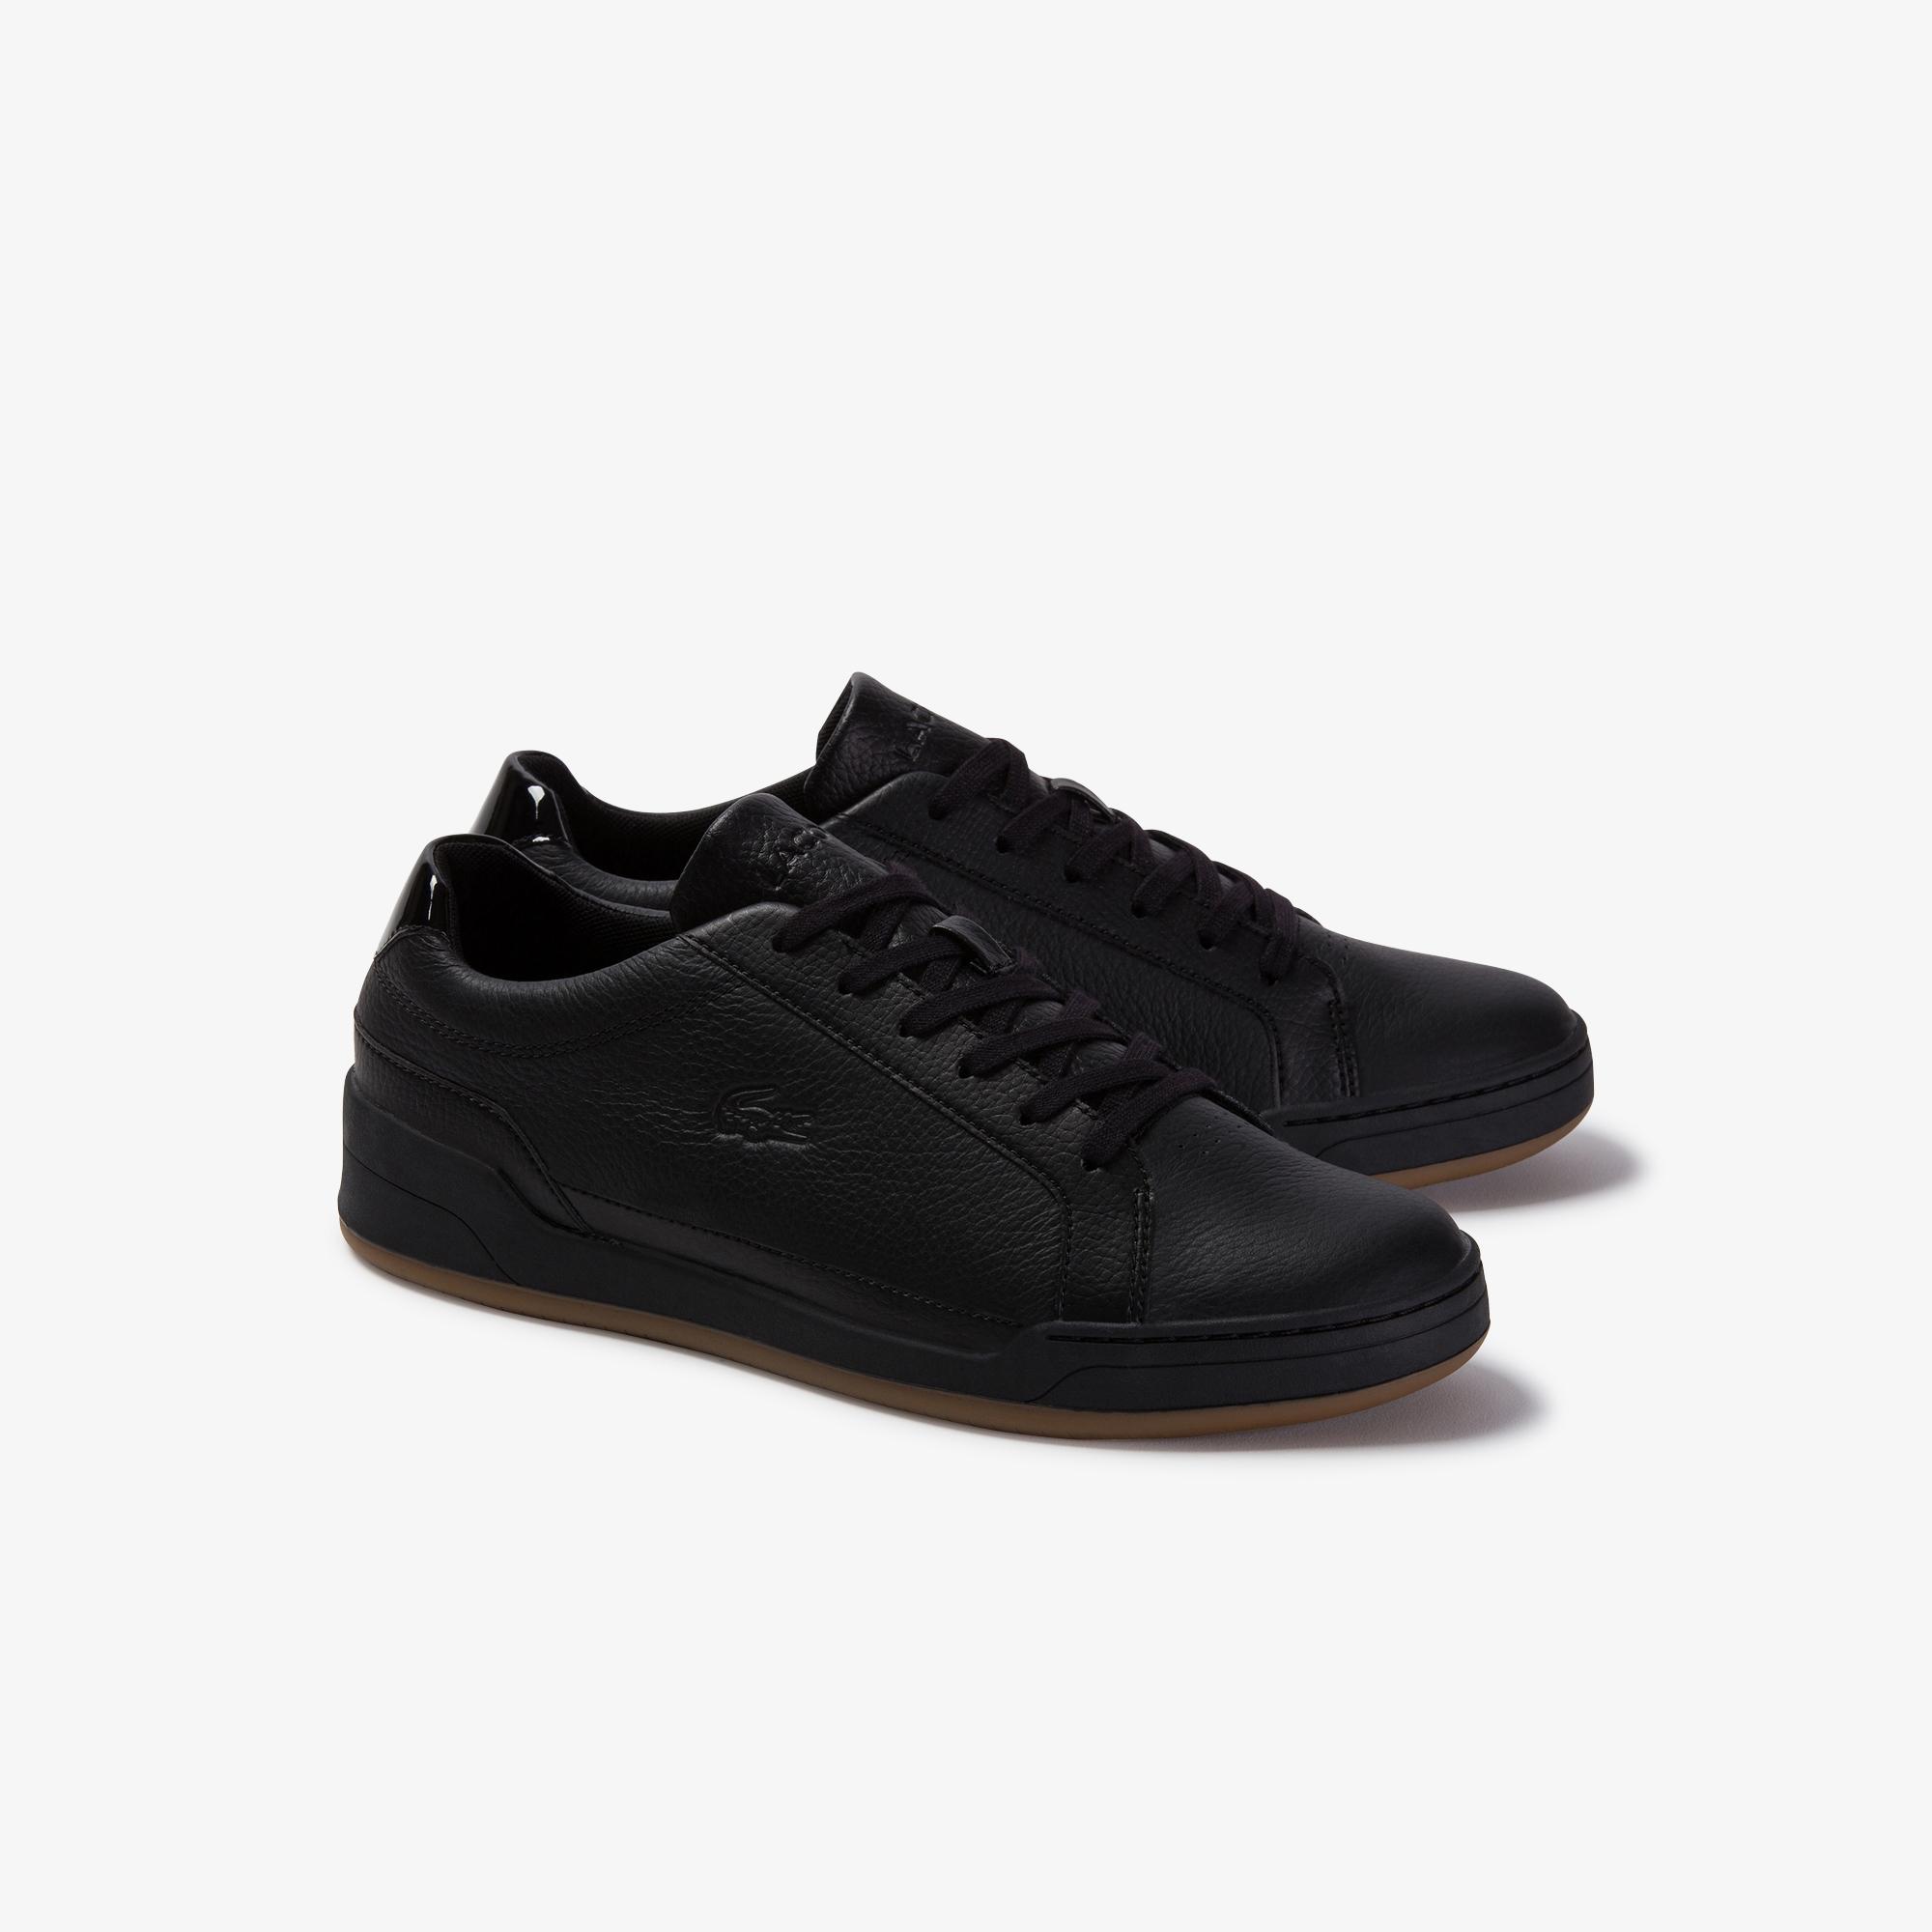 Lacoste Men's Challenge Tumbled Leather 